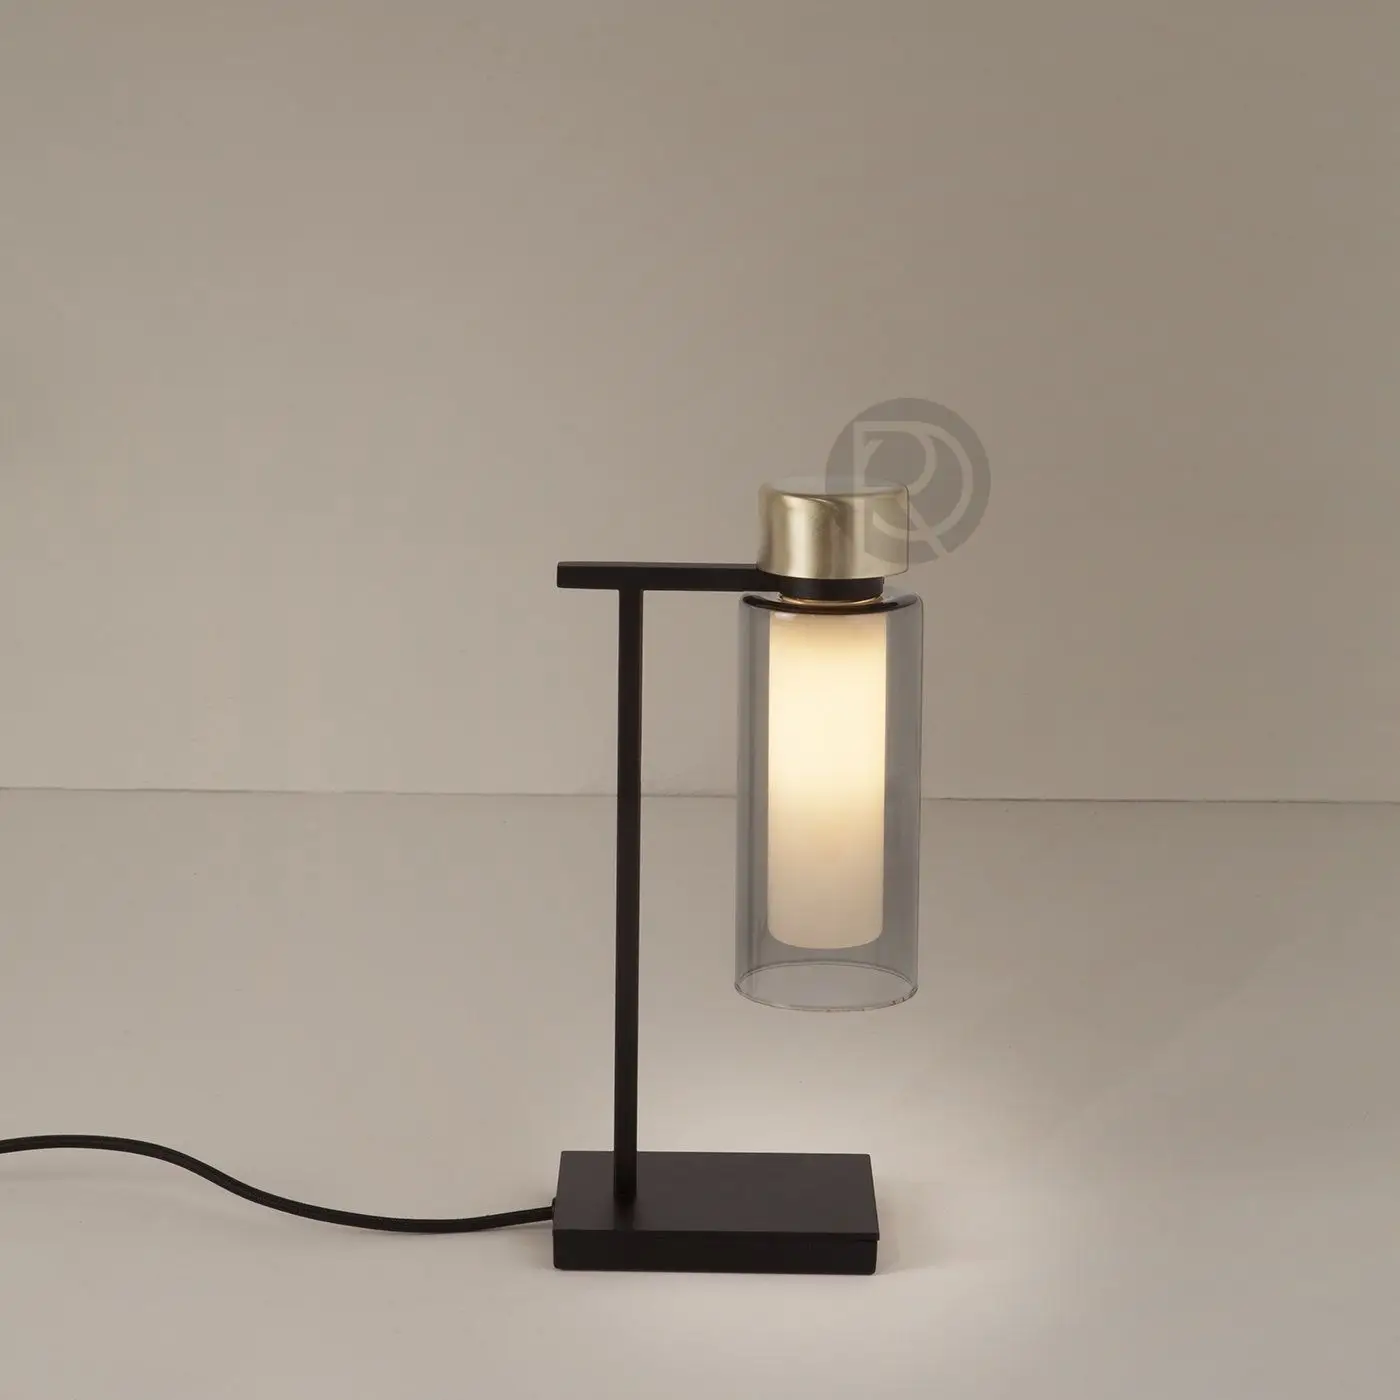 OSMAN TABLE LAMP by Tooy